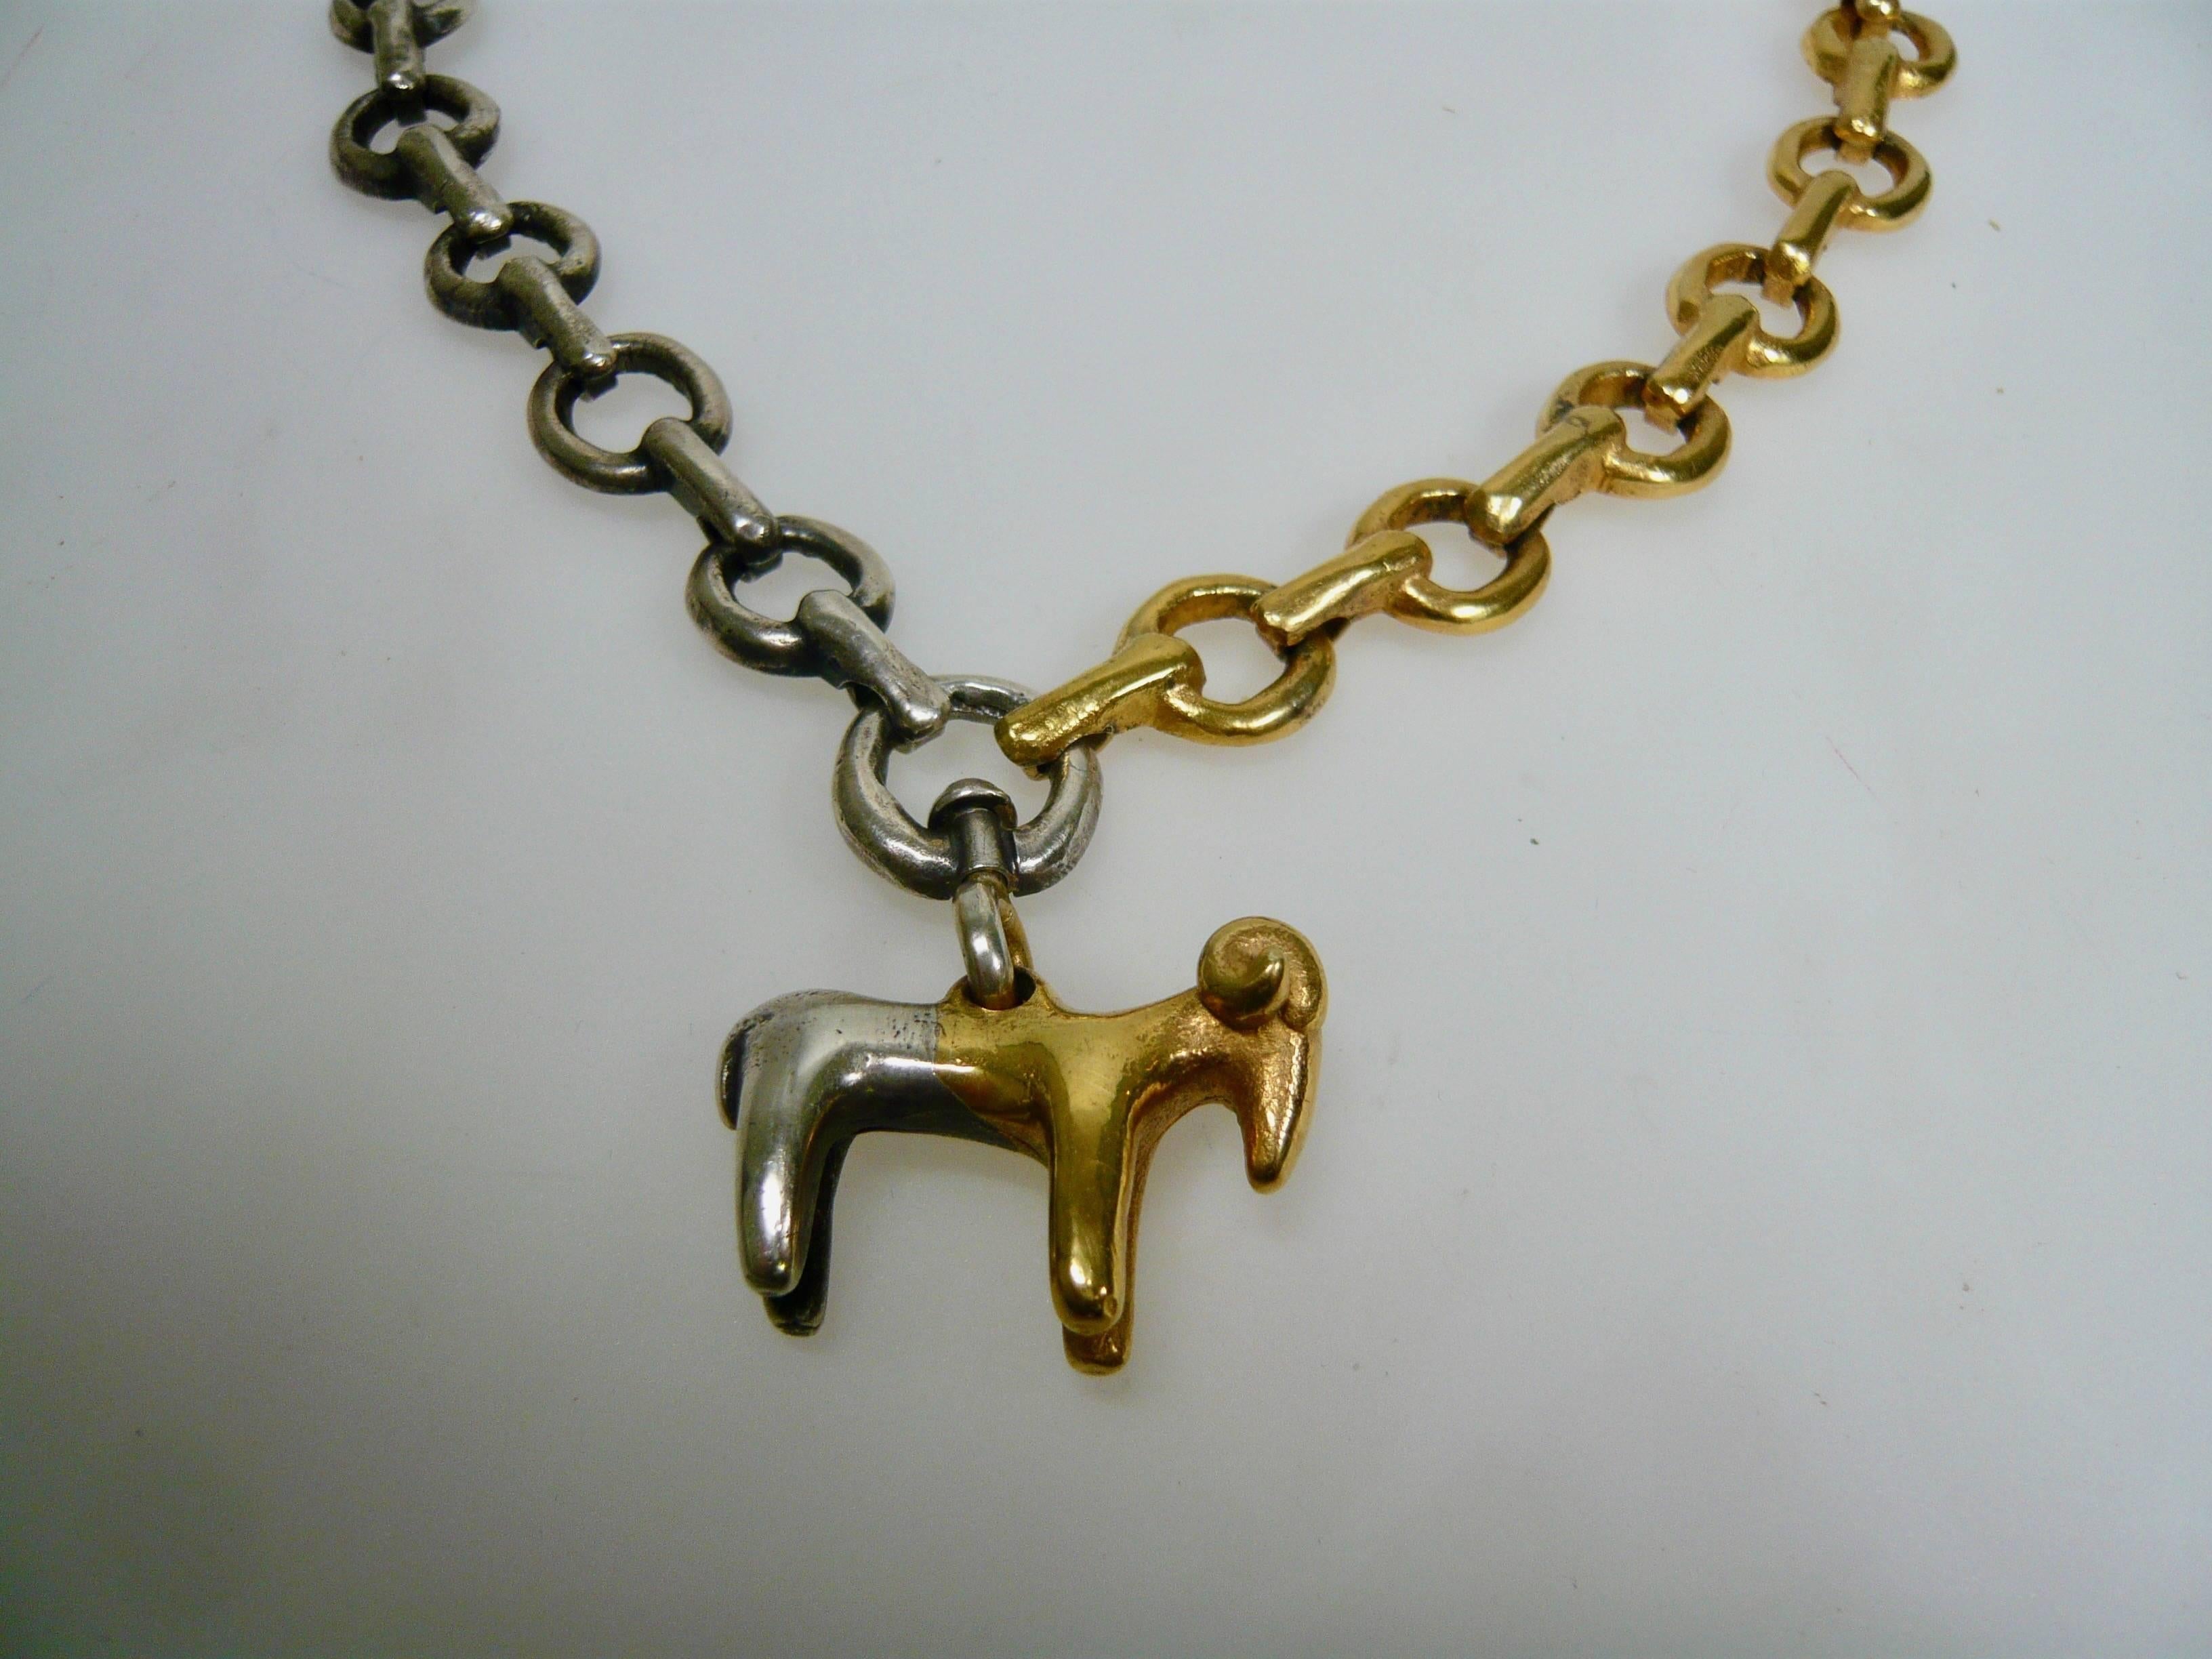 Silver and gold plated bronze necklace designed by French artist Line Vautrin
Signed with impressed signature LV
ca 1950